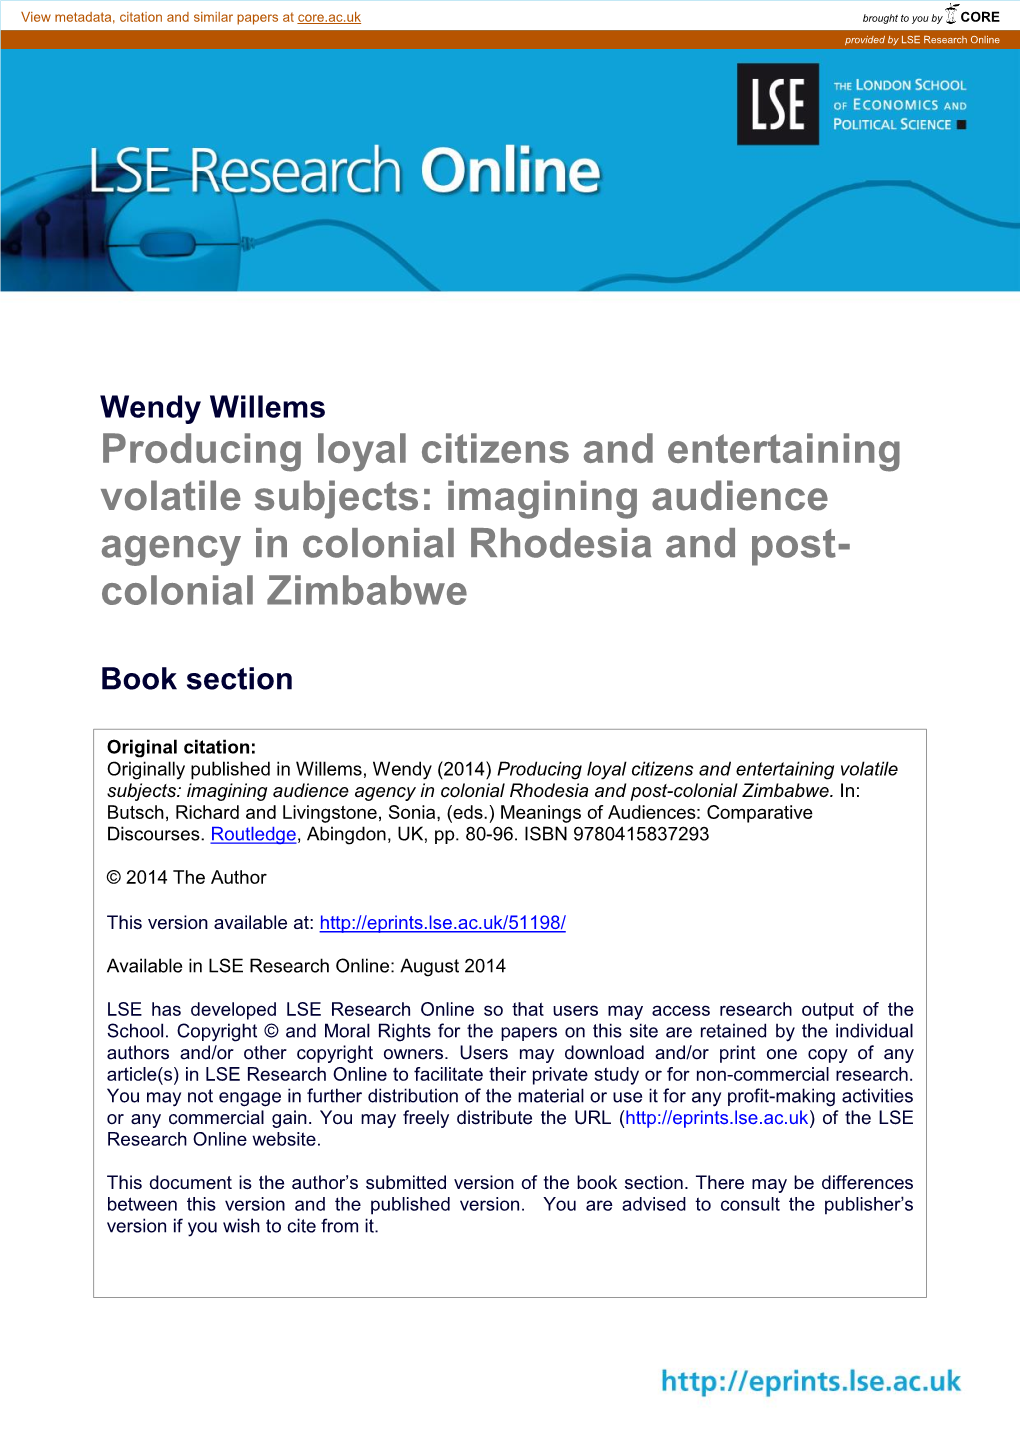 Imagining Audience Agency in Colonial Rhodesia and Post- Colonial Zimbabwe